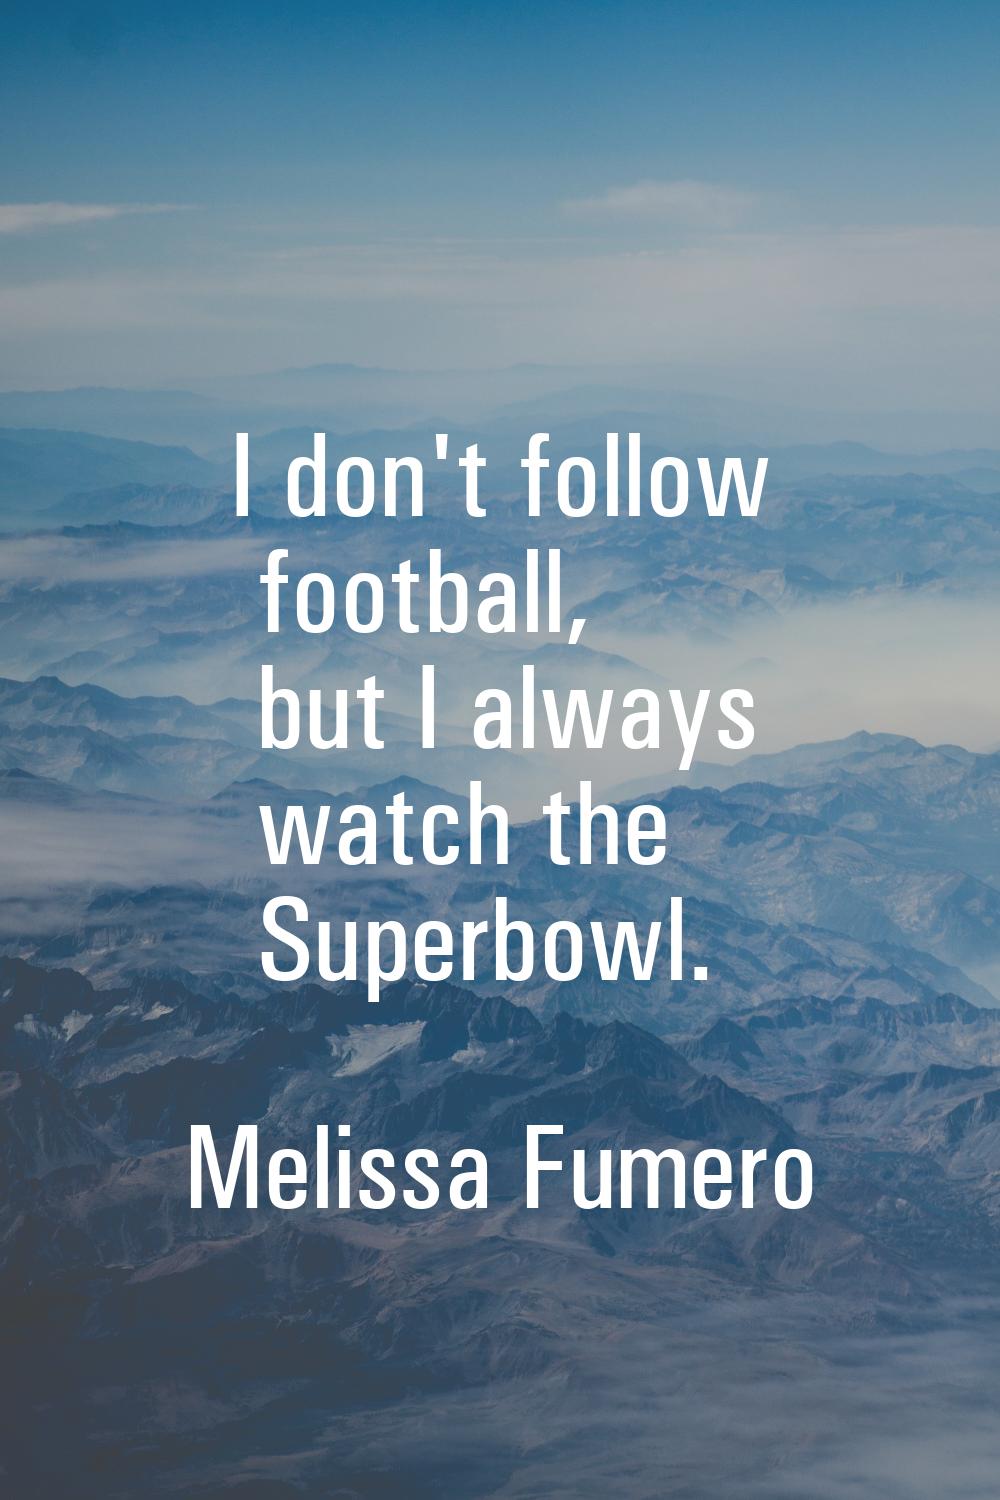 I don't follow football, but I always watch the Superbowl.